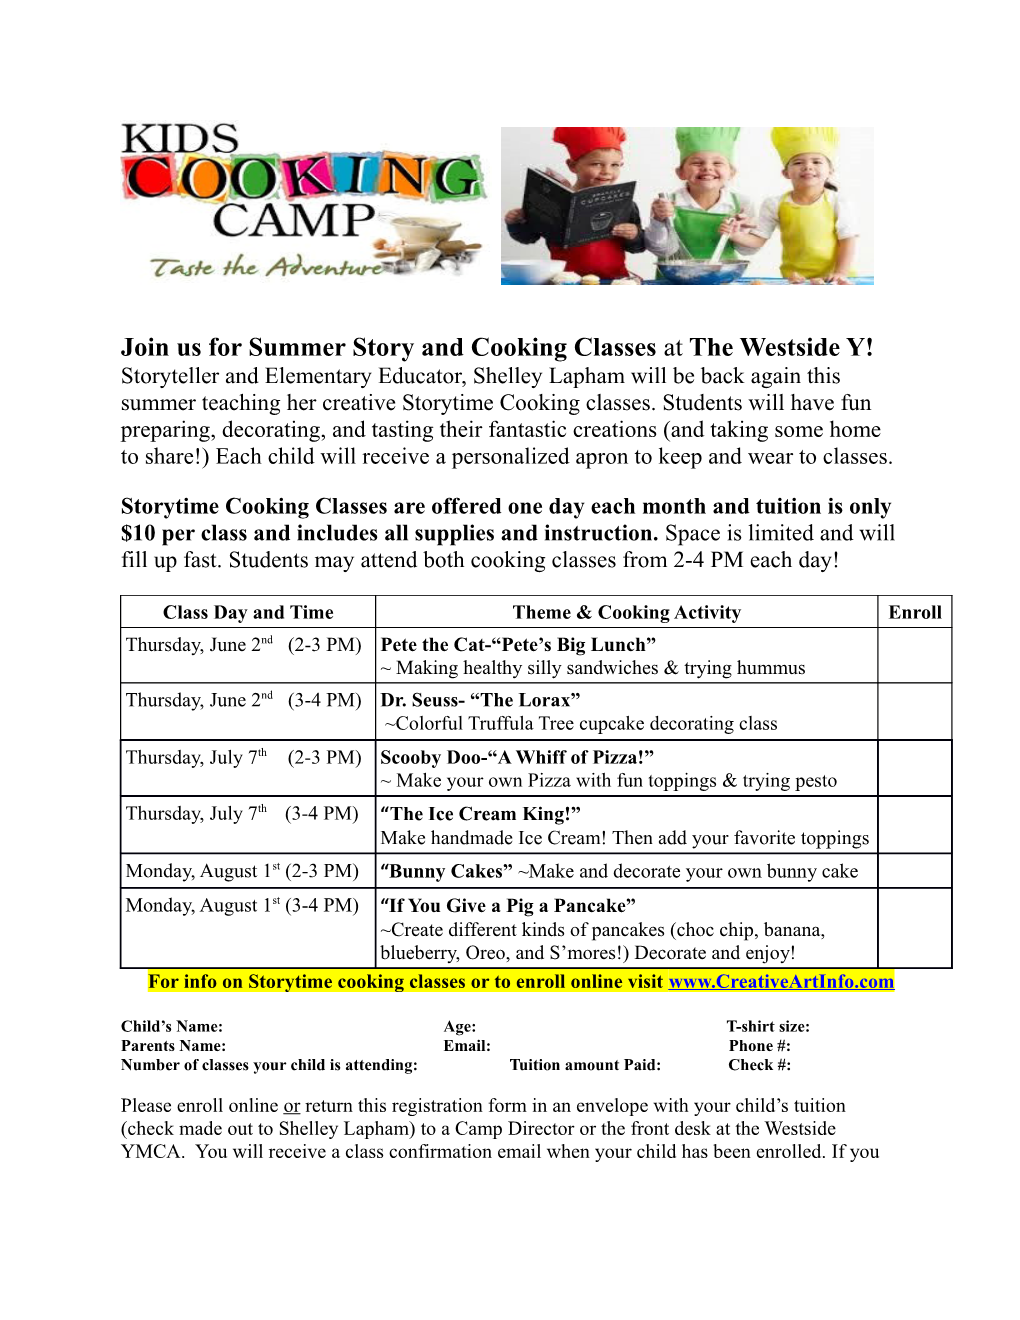 Join Us for Summer Story and Cooking Classes at the Westside Y!